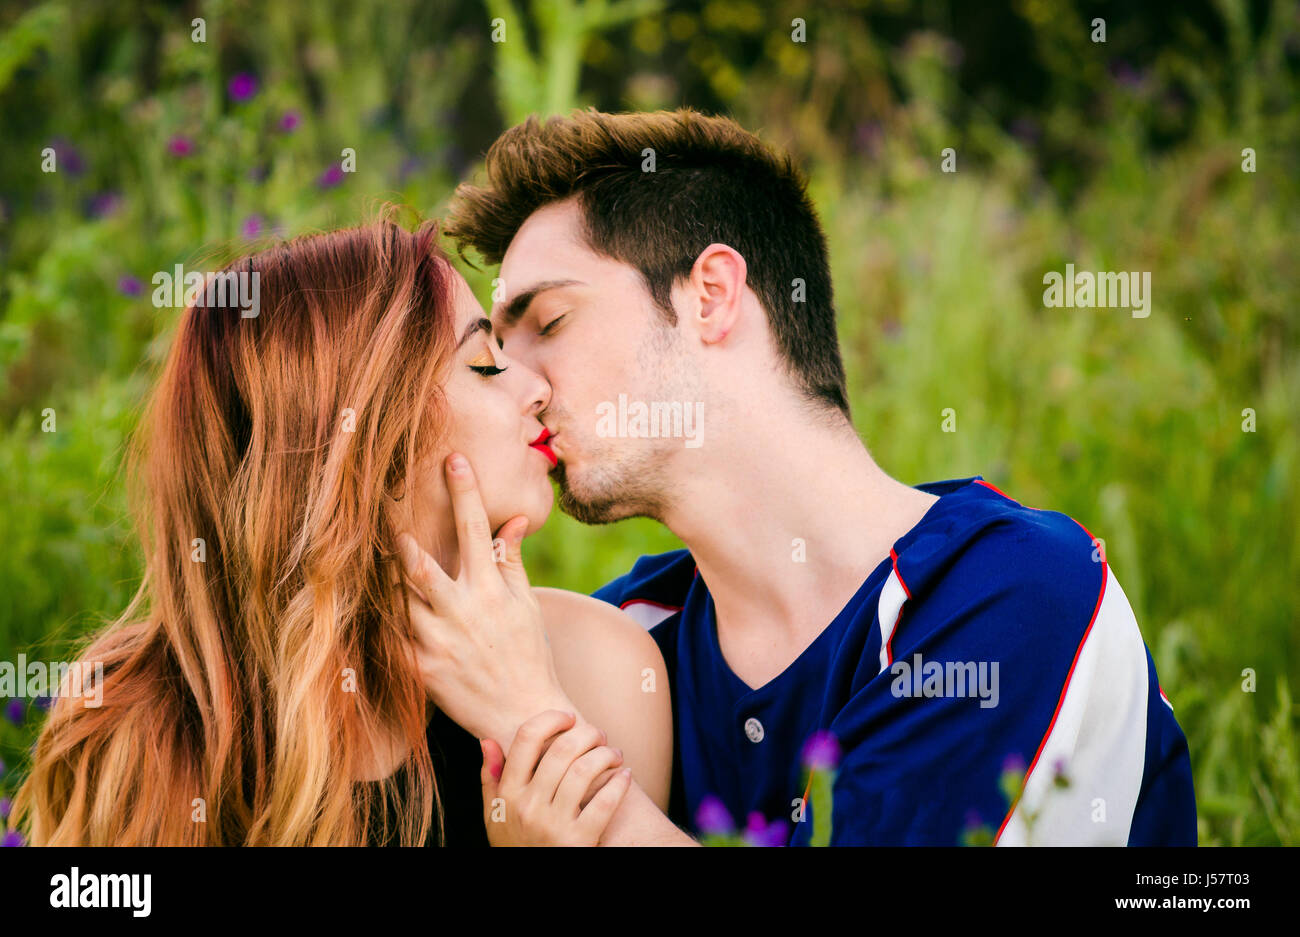 passionate romantic young couple kissing and embracing while in a green park on holiday. Romantic lifestyle and love, outdoors. Stock Photo